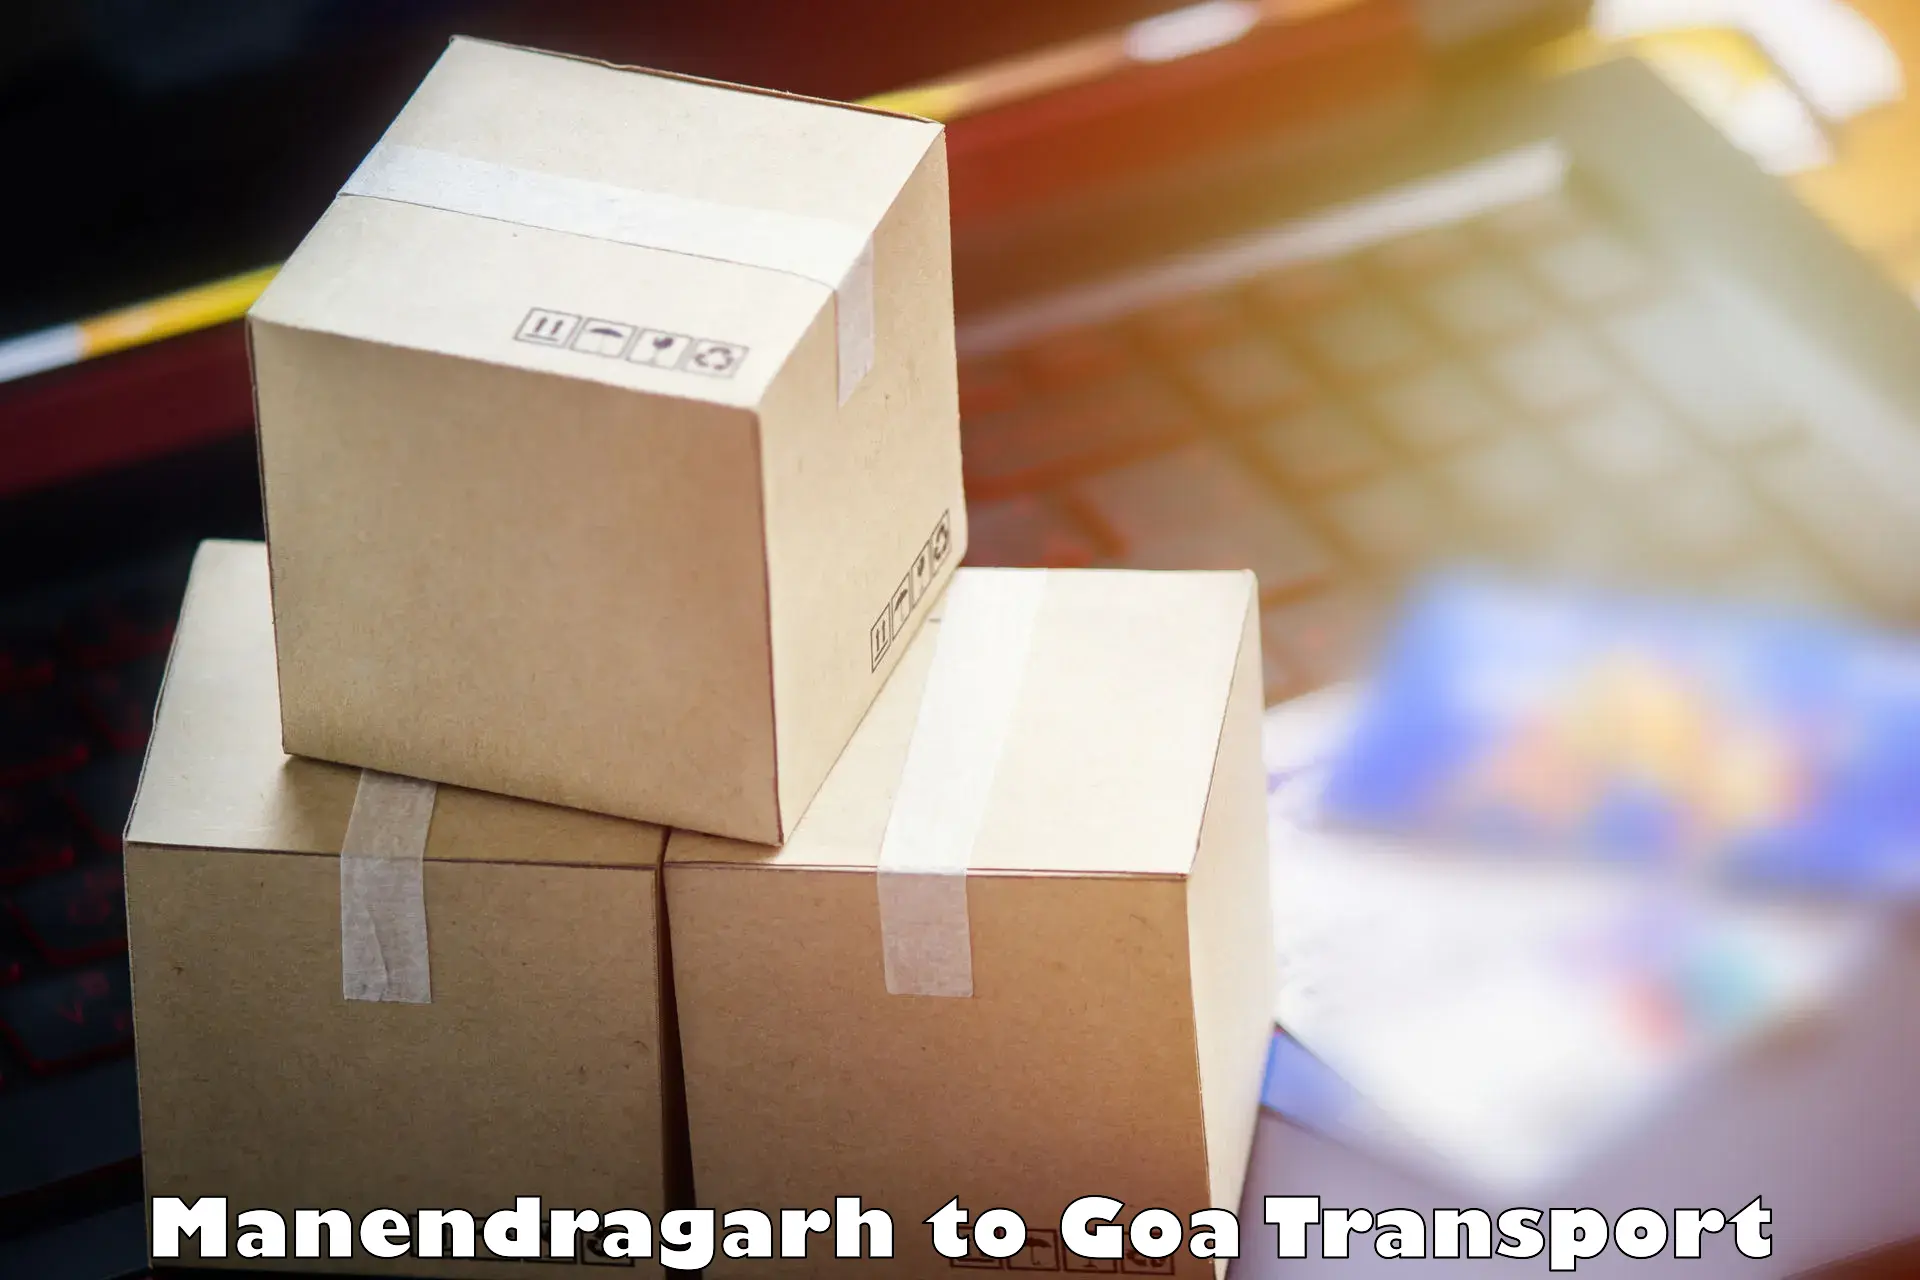 Goods delivery service Manendragarh to Bardez